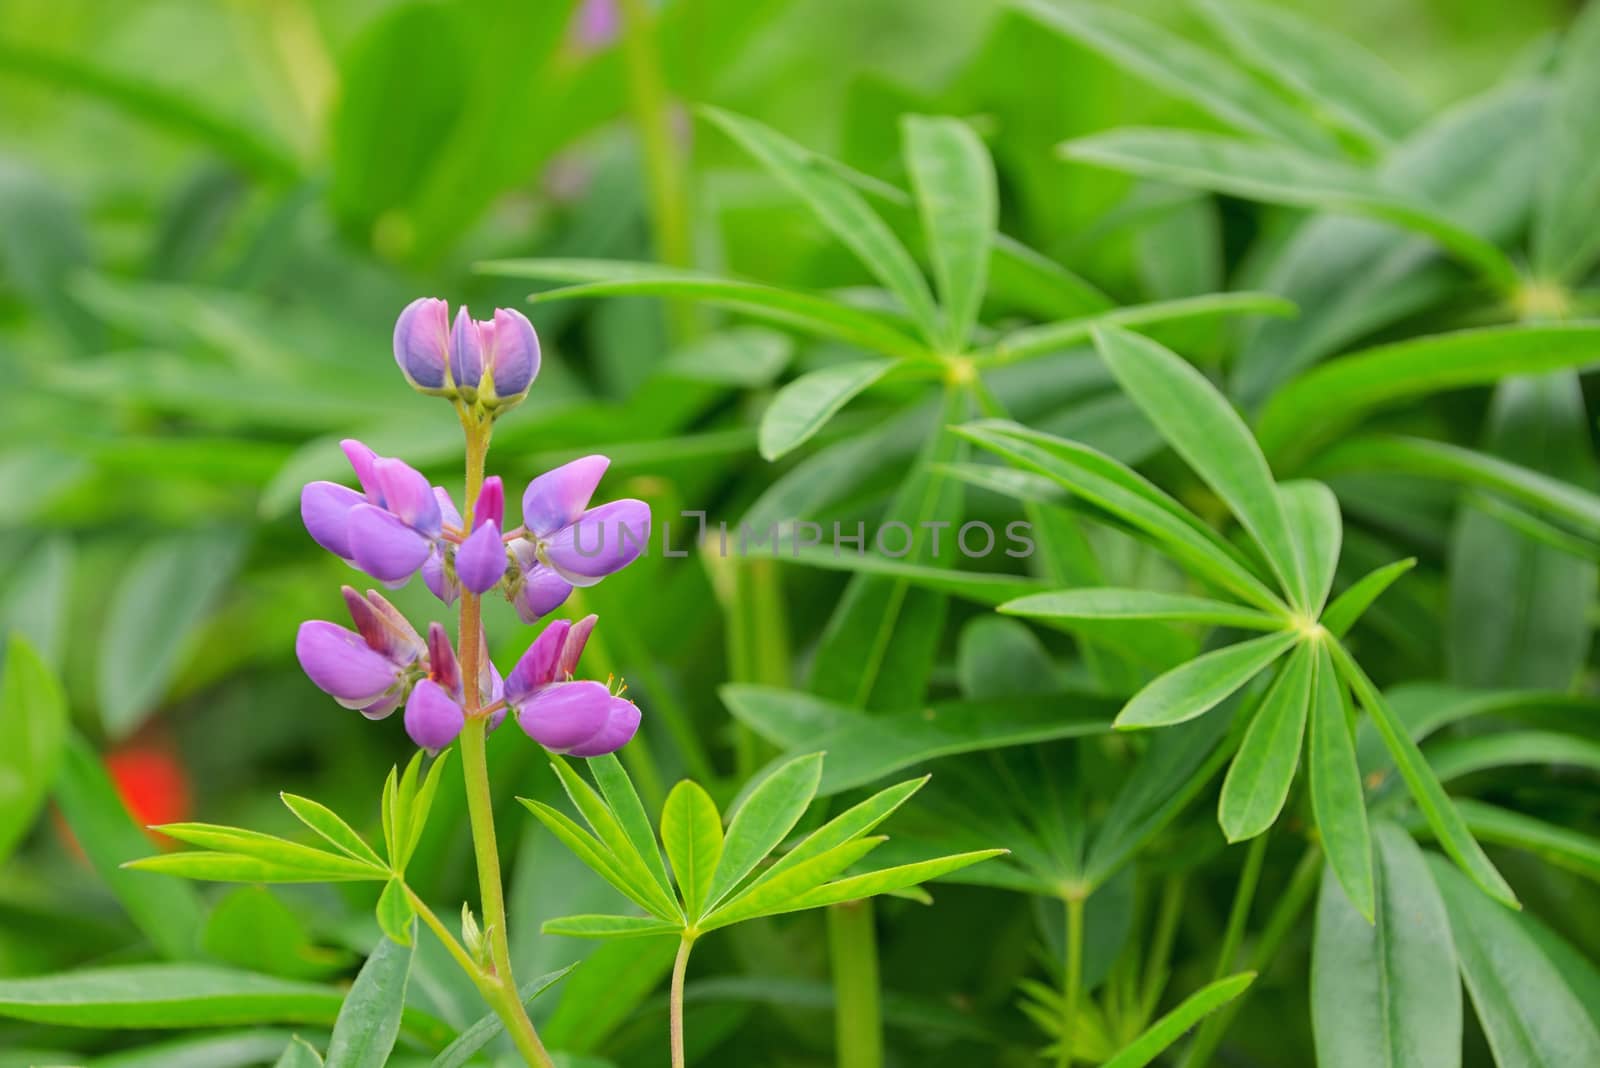 Lupine flower in the botanical garden by mady70